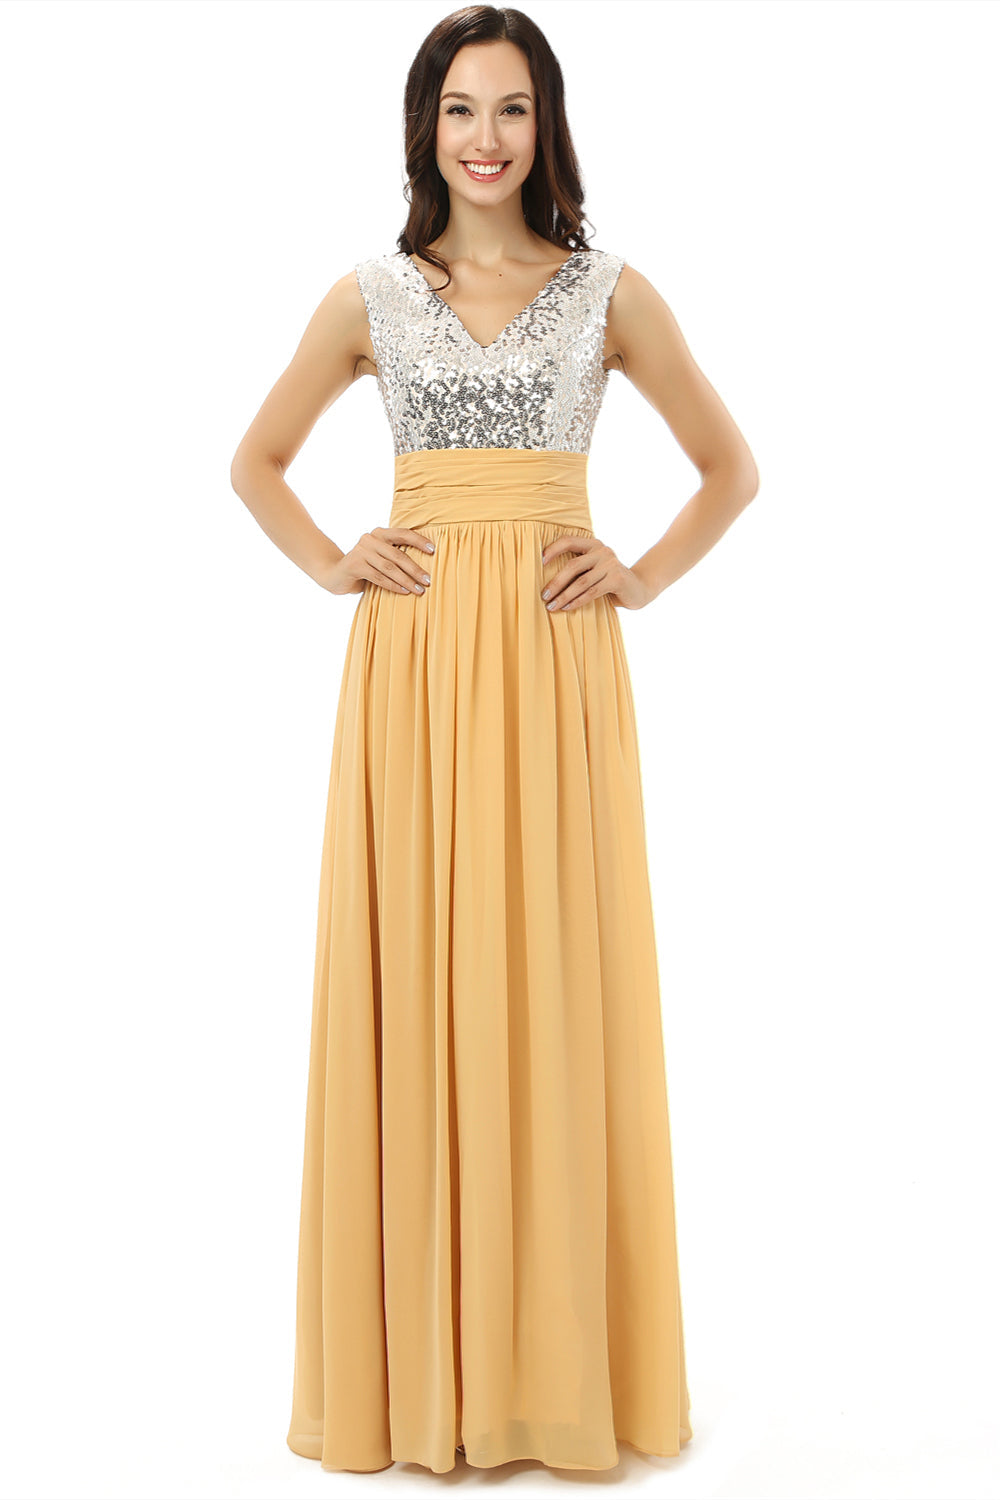 Yellow Chiffon Silver Sequins V-neck Backless Corset Bridesmaid Dresses outfit, Party Dress Styles